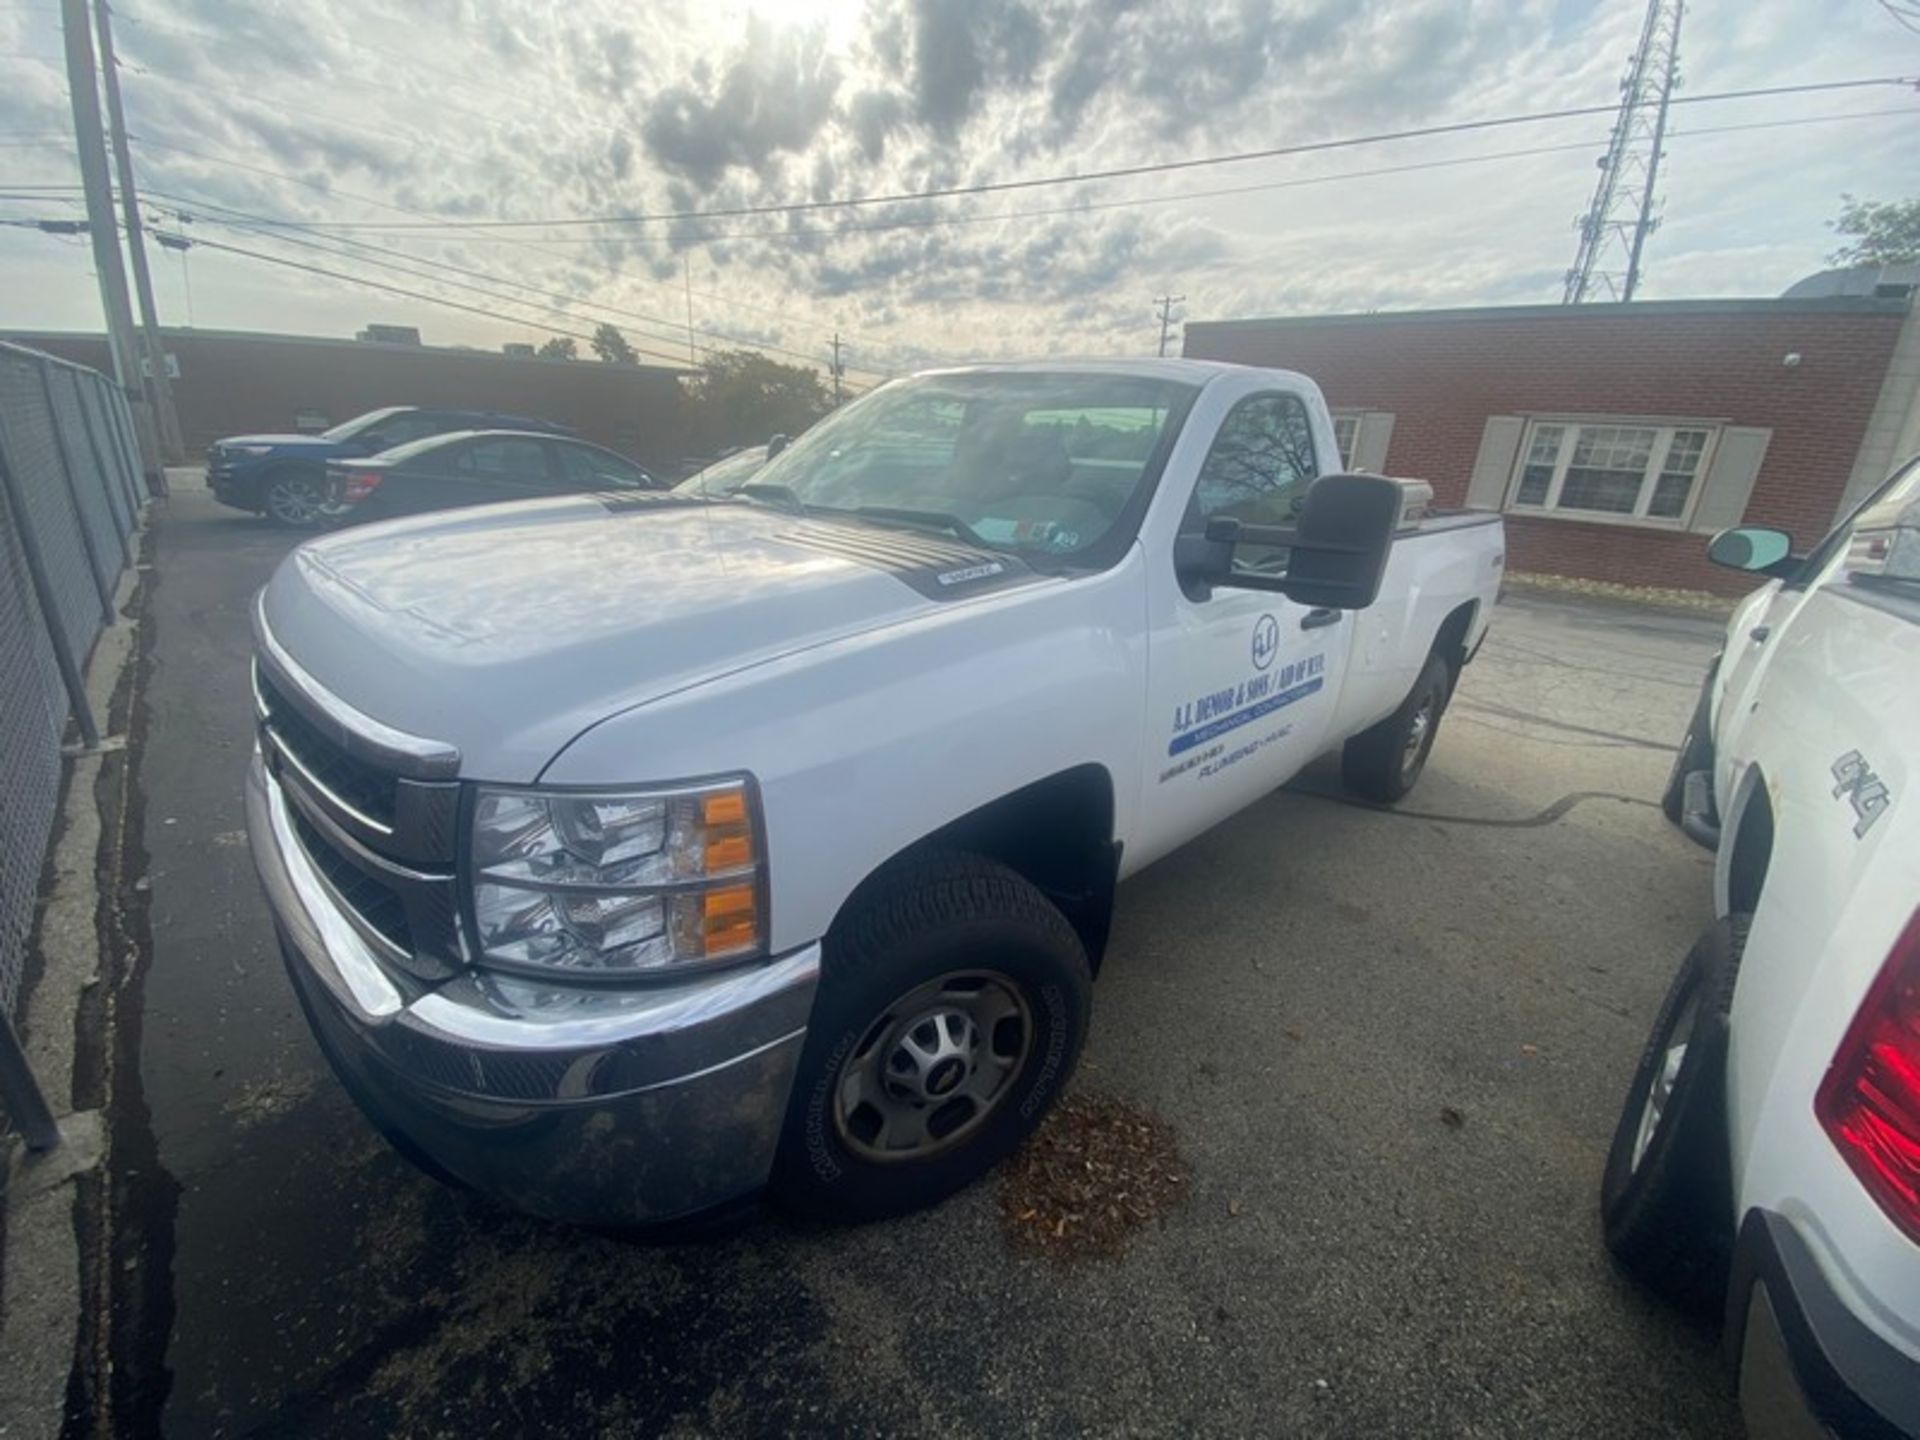 2013 Silverado 2500 HD Pick Up Truck, with Weather Guard Bed Tool Box, Model: K20903, VIN#: